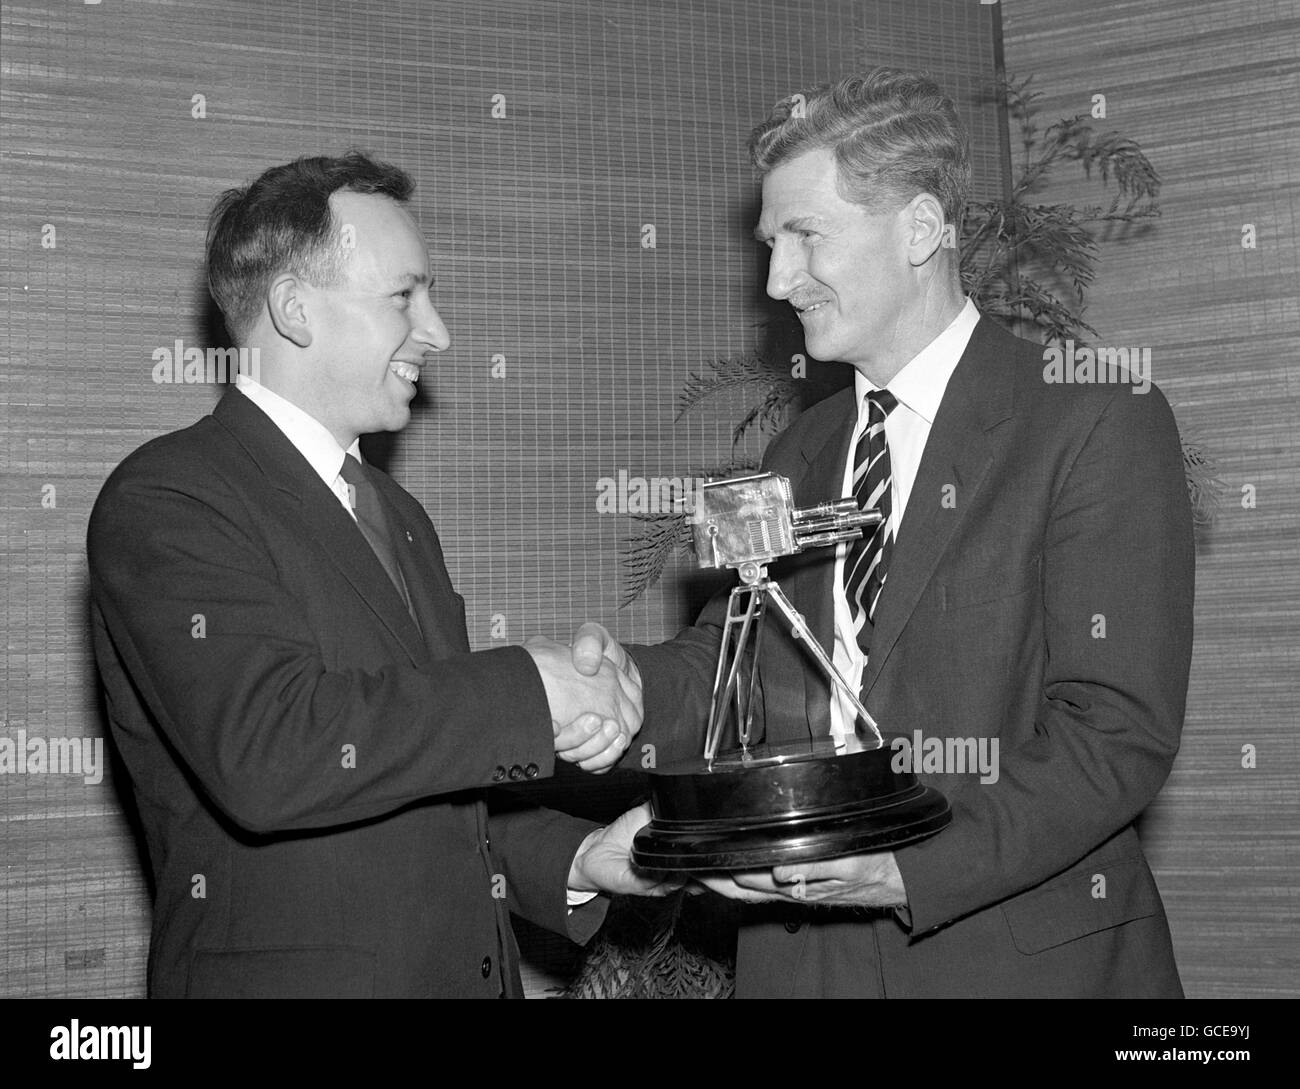 BBC Sports Personality of the Year Award - BBC TV Theatre, Shepherd's Bush. Sir John Hunt, right, presents motorcyclist John Surtees with the BBC Sports Personality of the Year Award Stock Photo